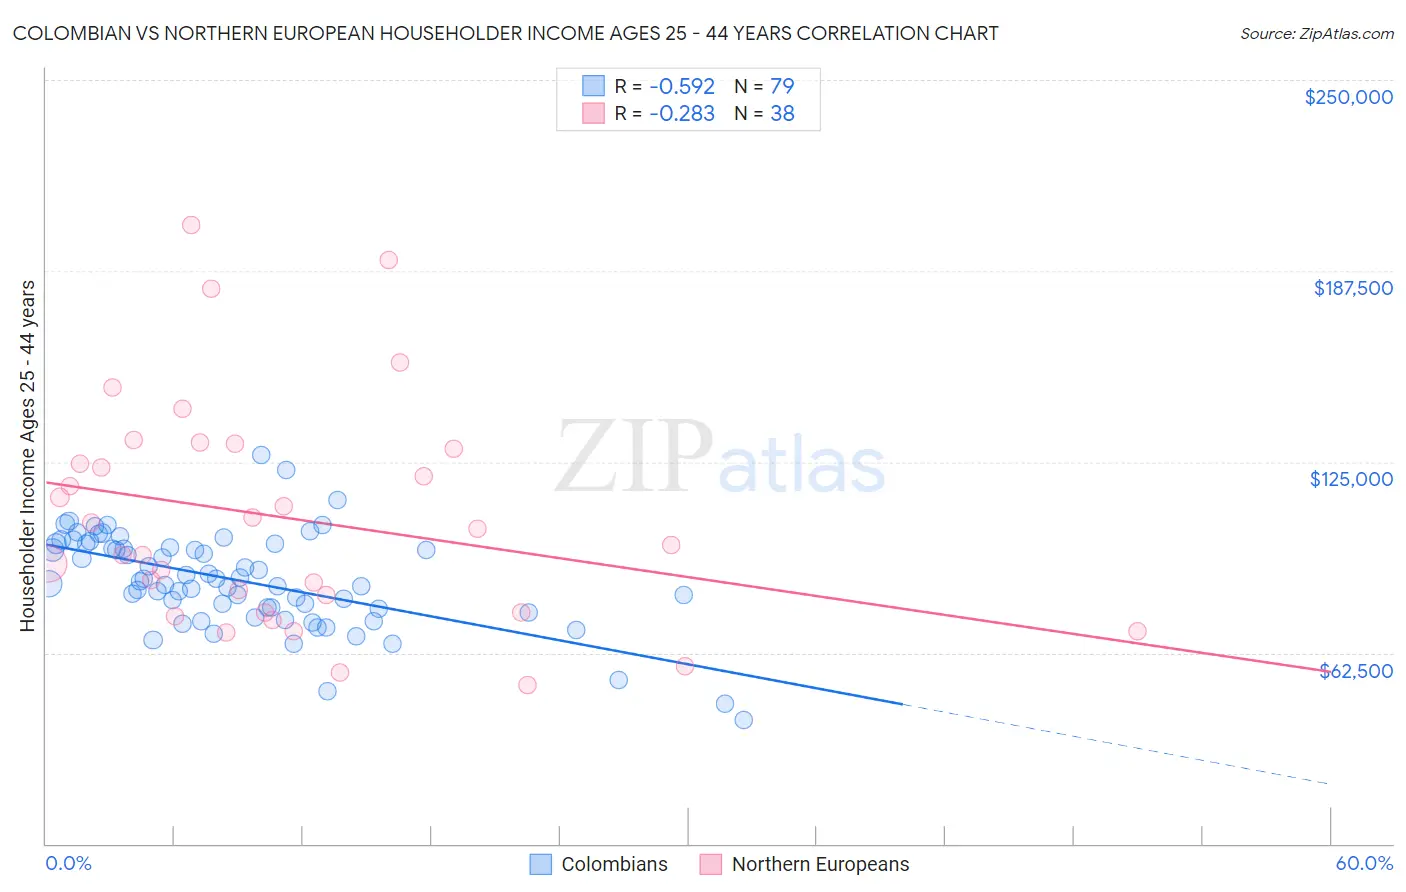 Colombian vs Northern European Householder Income Ages 25 - 44 years